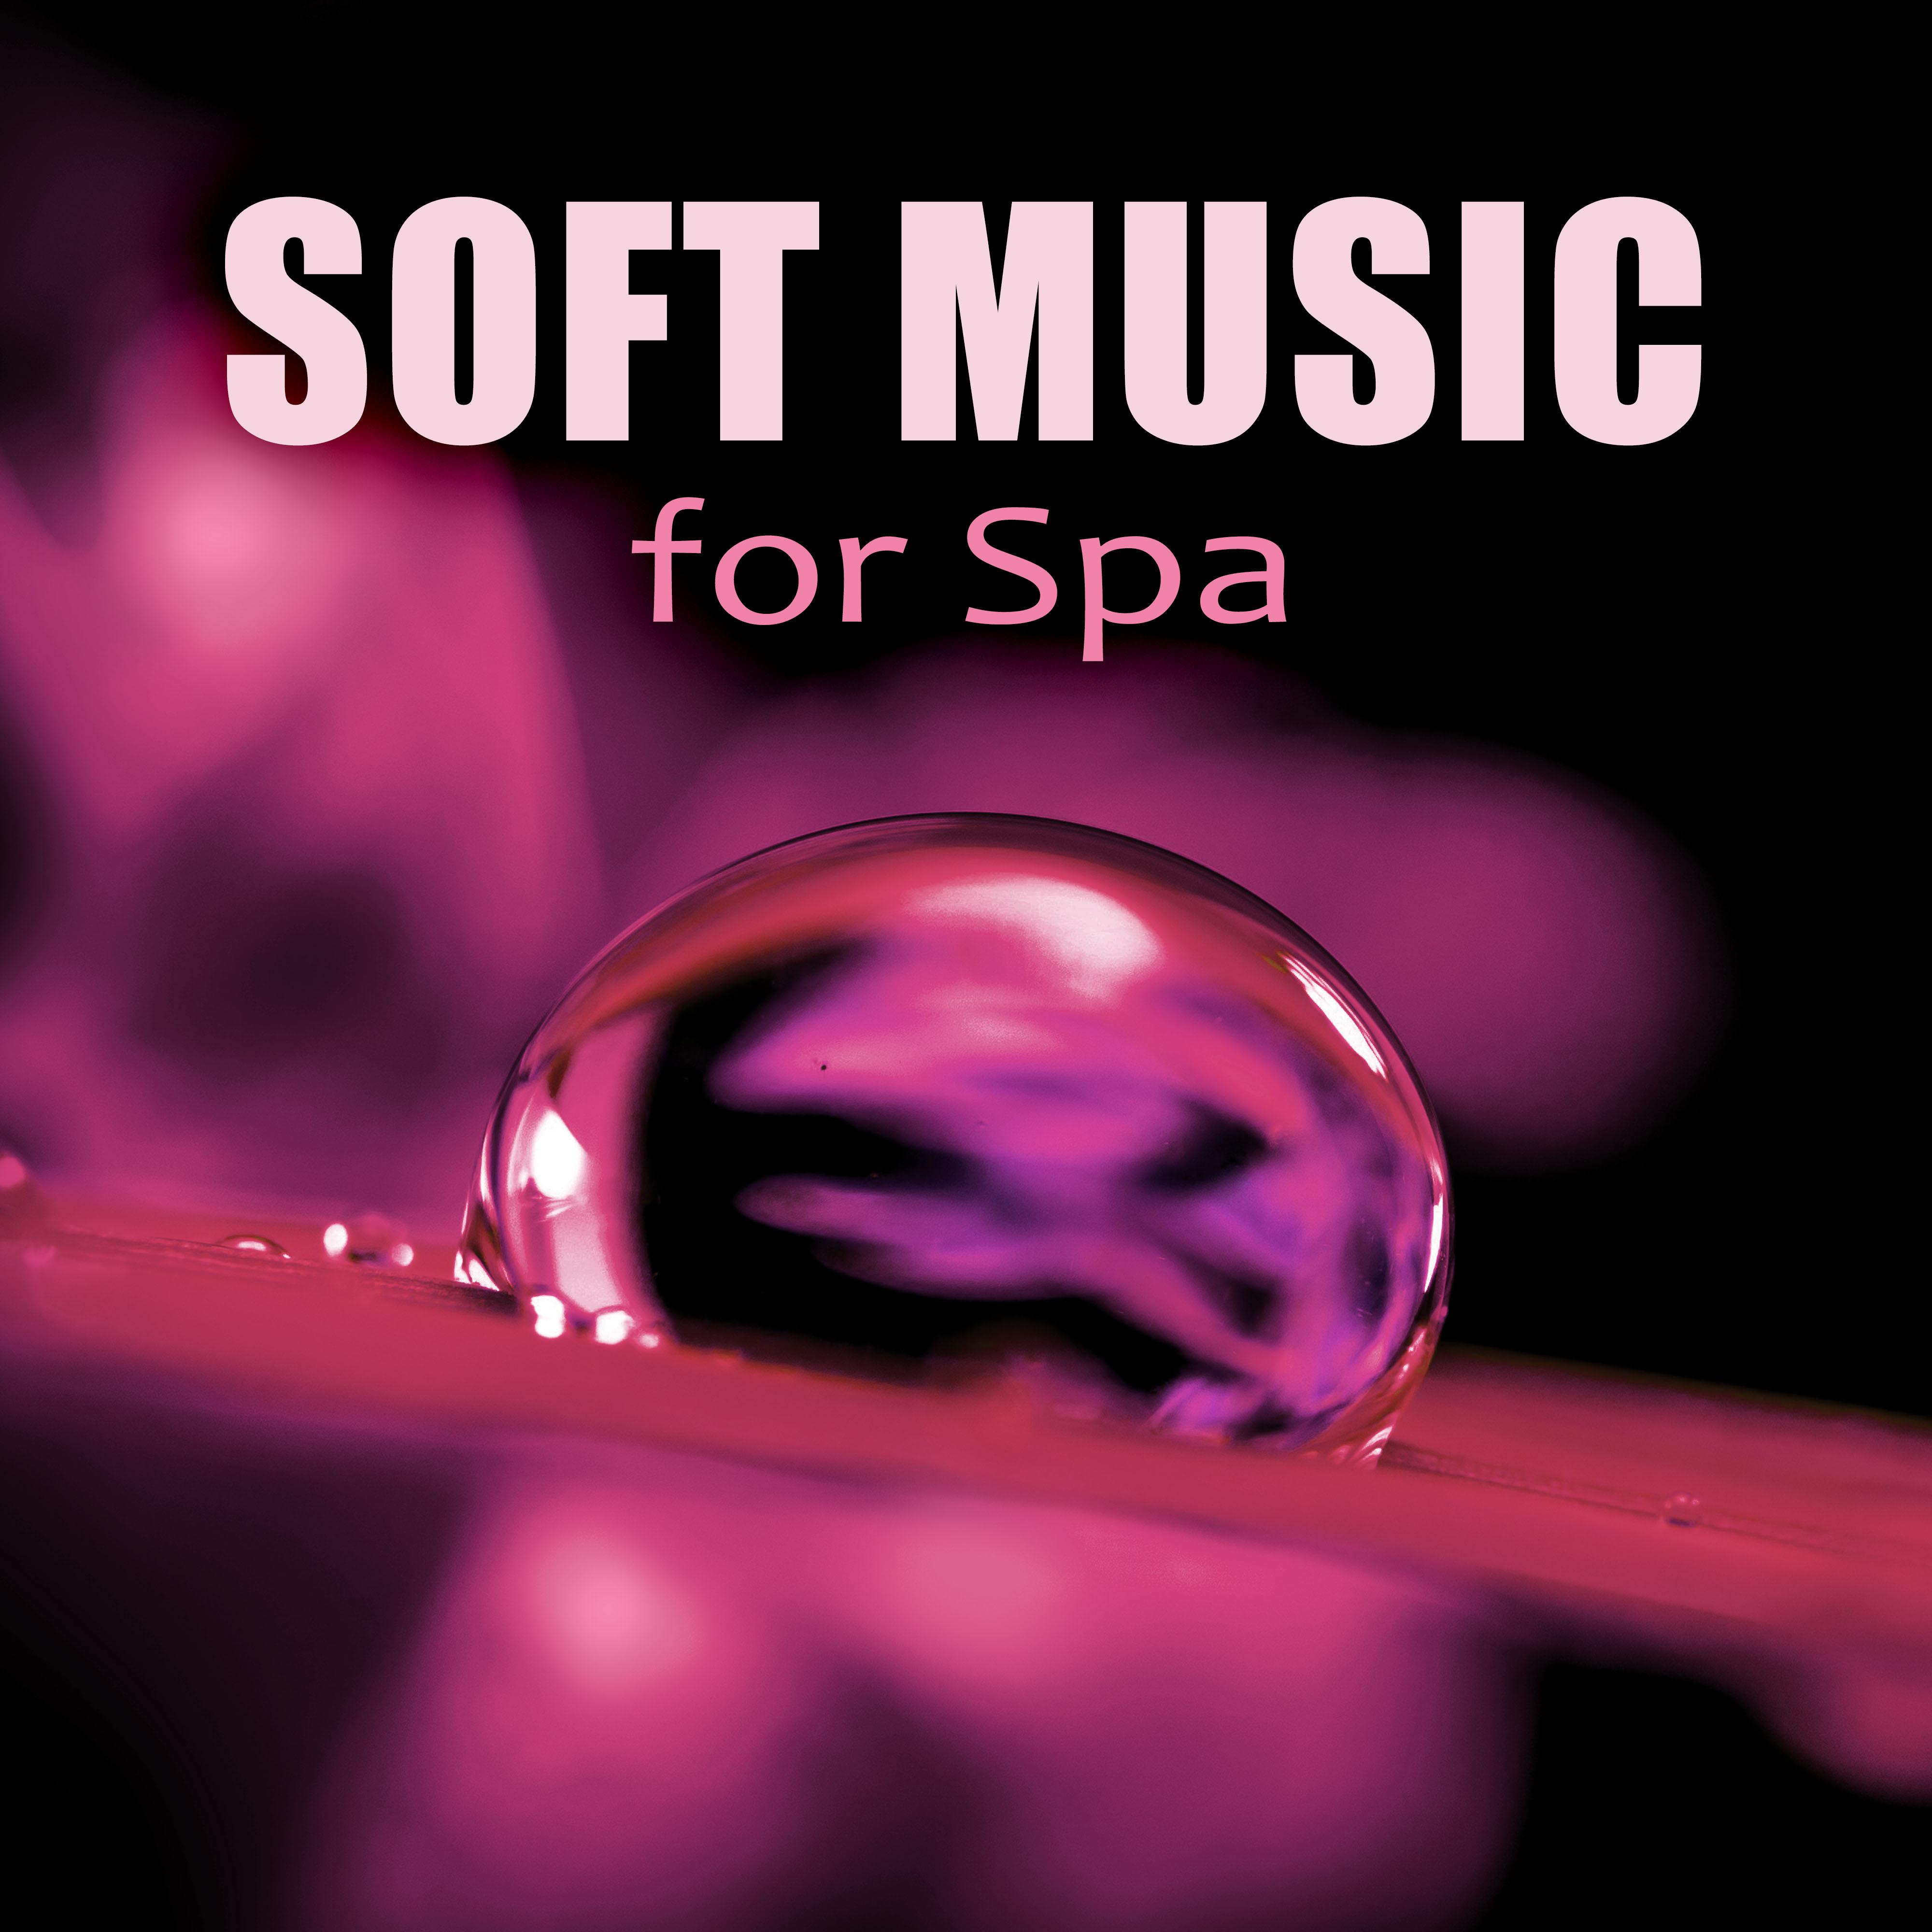 Soft Music for Spa - Healing Touch, Massage Sounds, Natural Sounds, Therapy Massage Music, Peaceful Massage